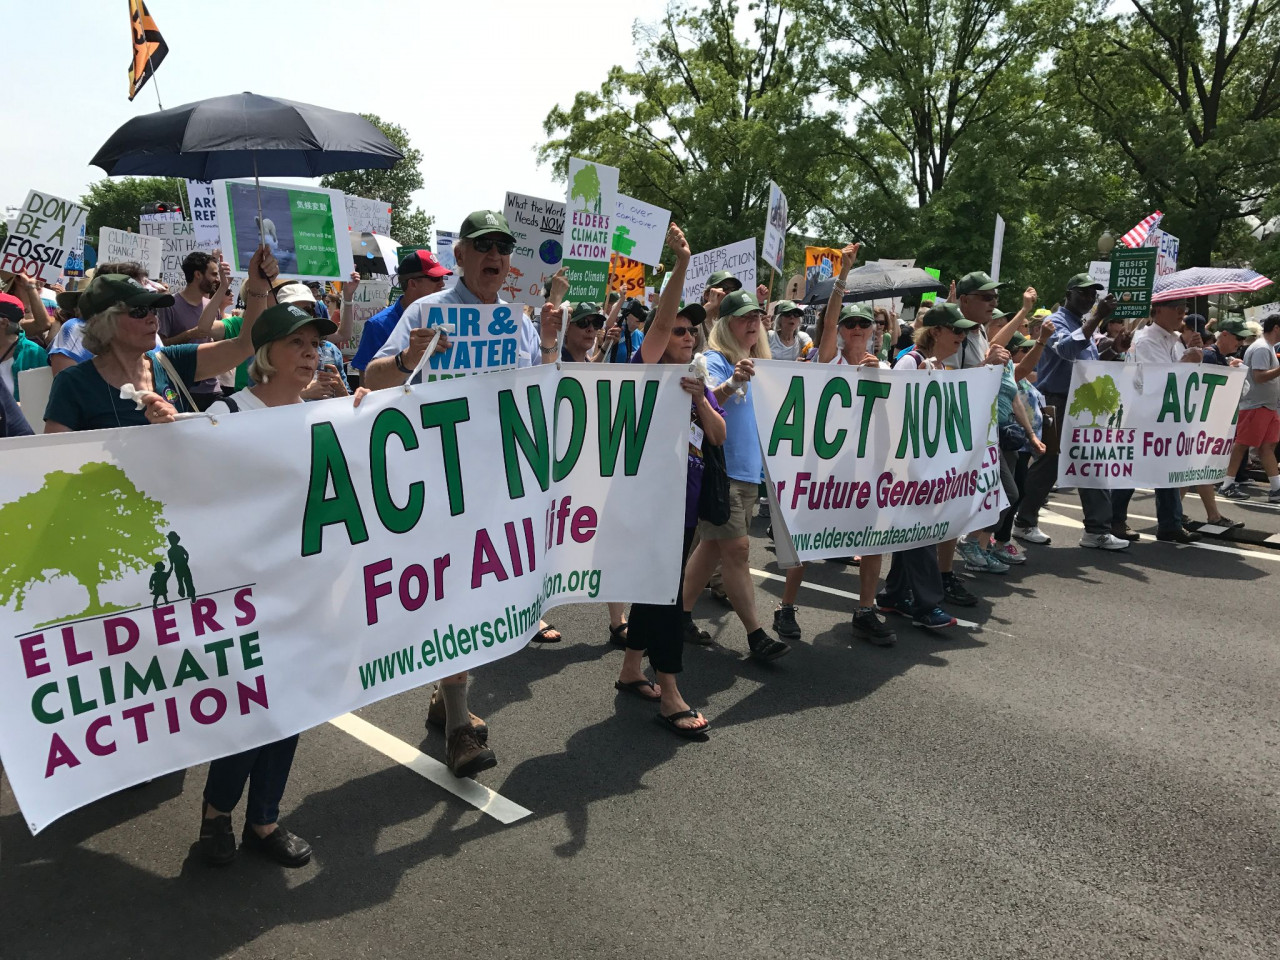 People's Climate March 2017 - Elders Climate Action - Act Now